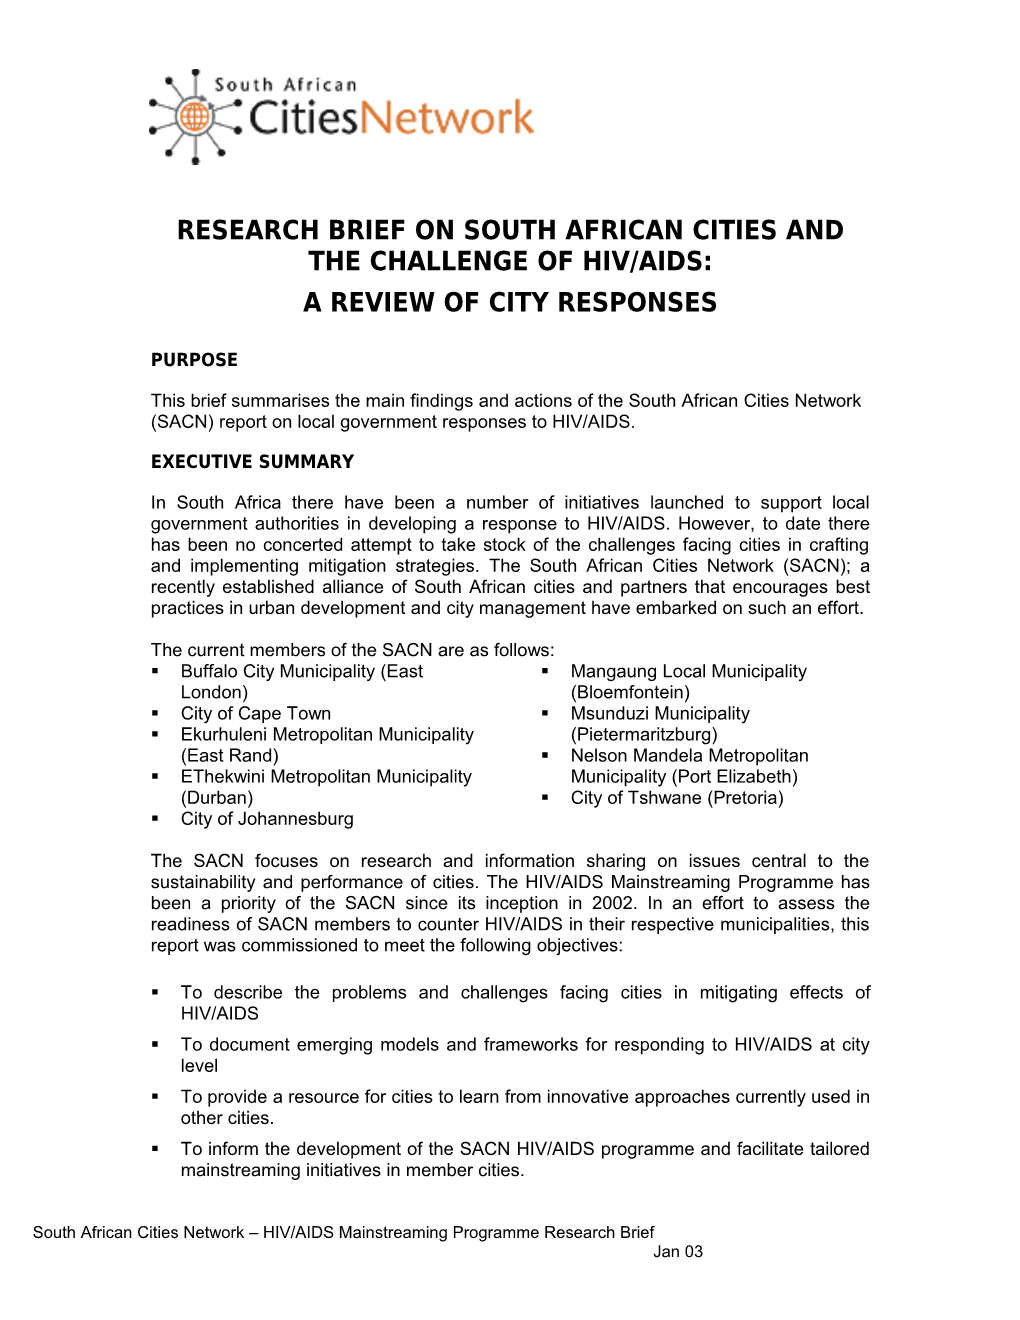 South African Cities and the Challenge of Hiv/Aids